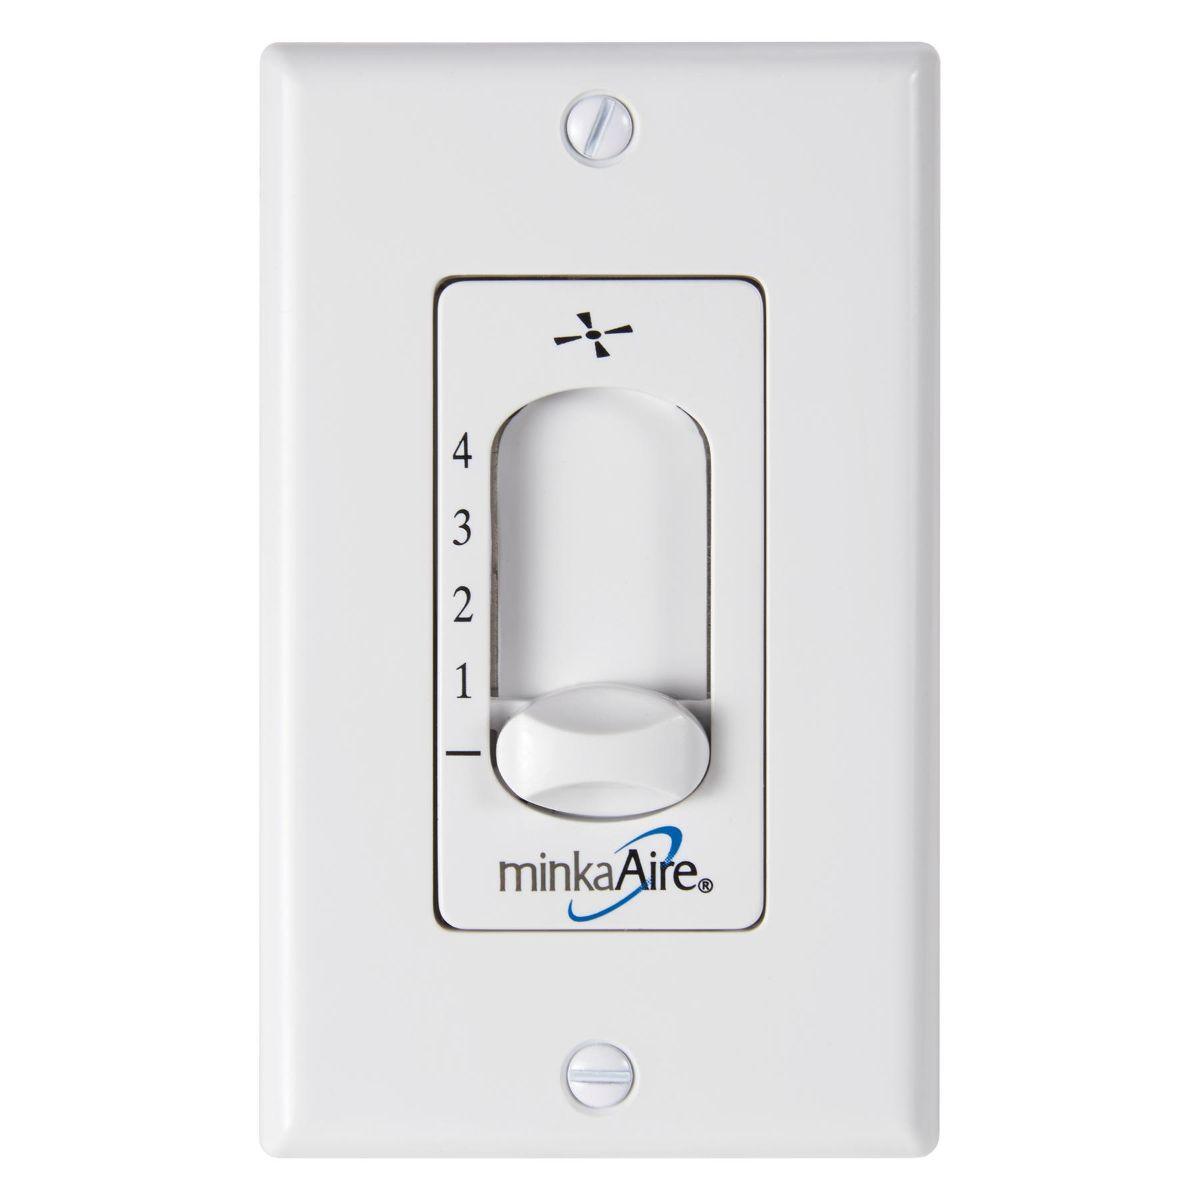 4-Speed Ceiling Fan Wall Control System - Bees Lighting